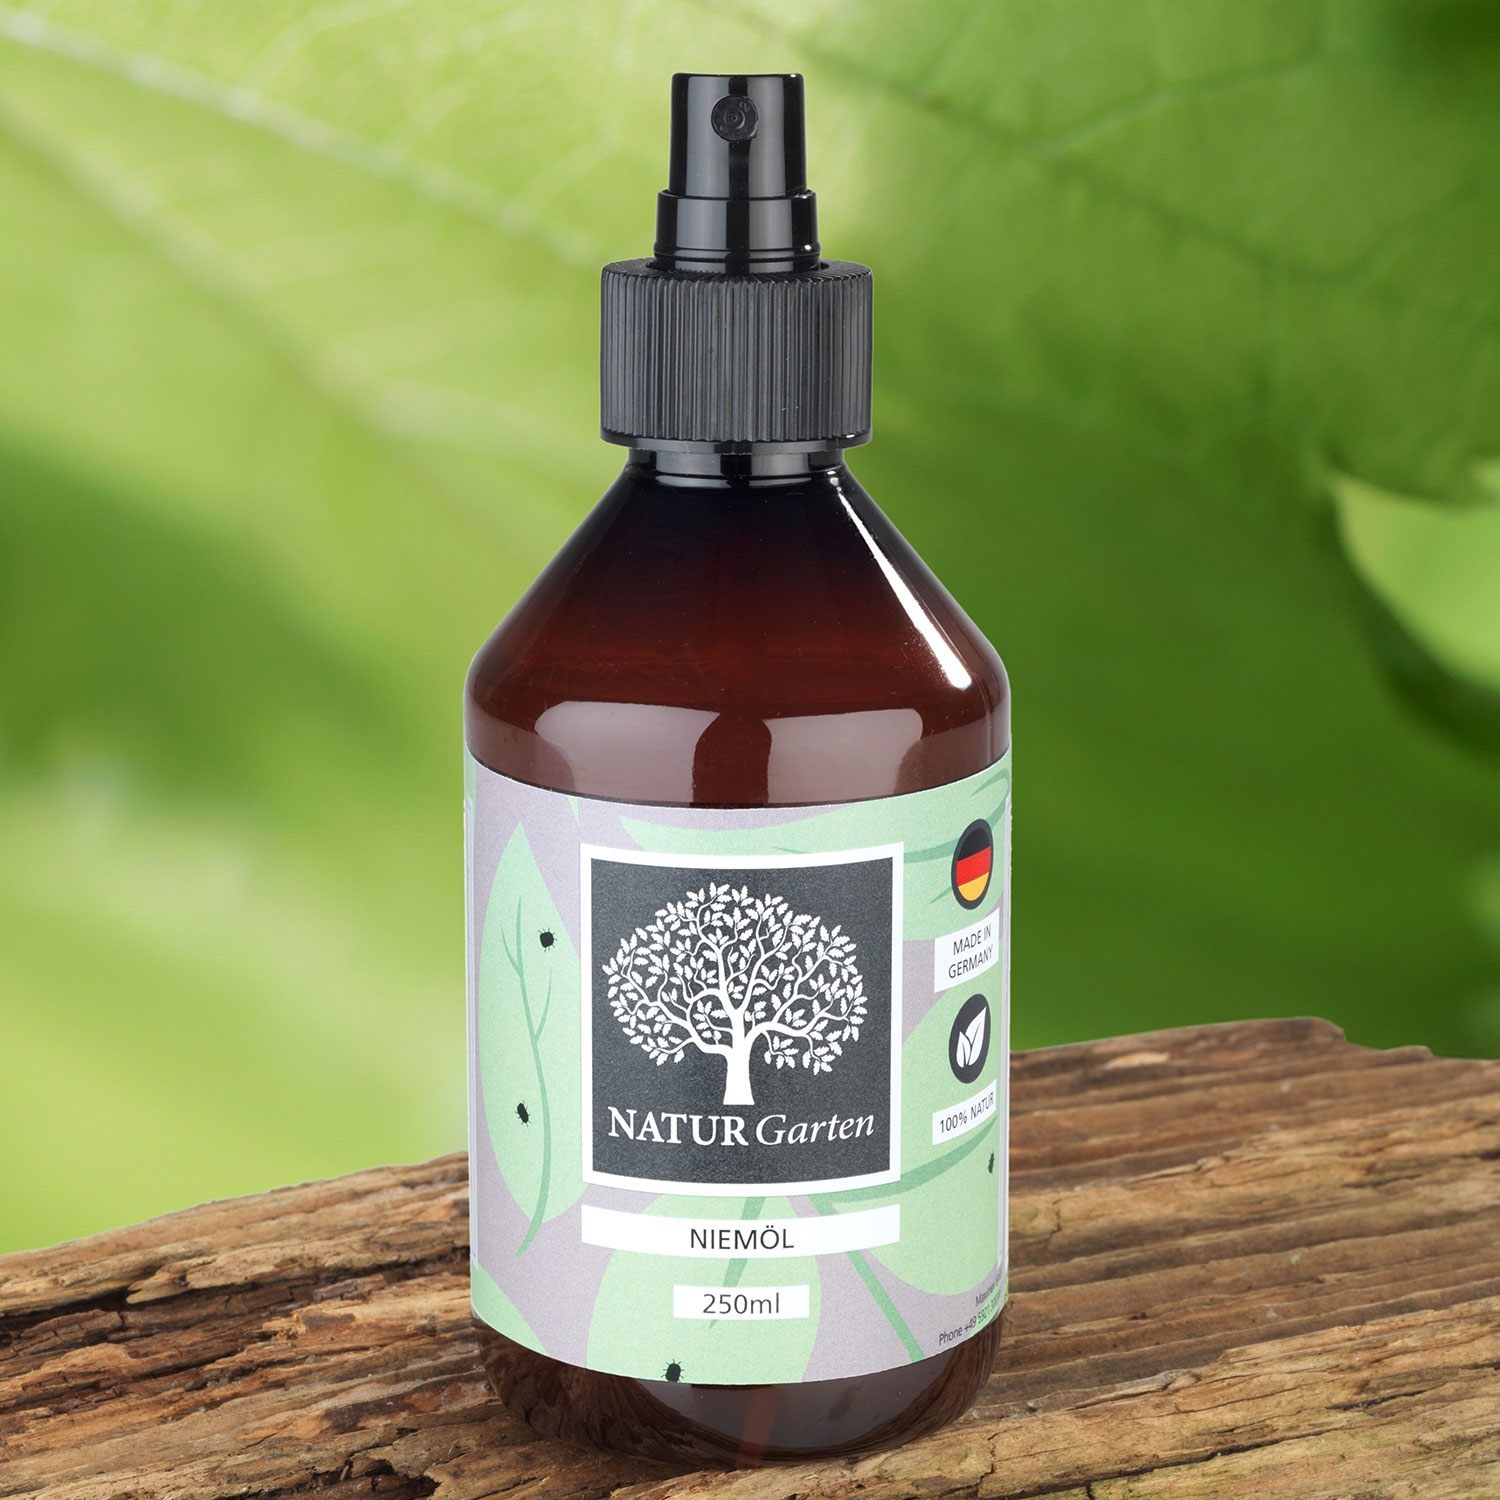 neem oil extract - the all-rounder for repelling pests